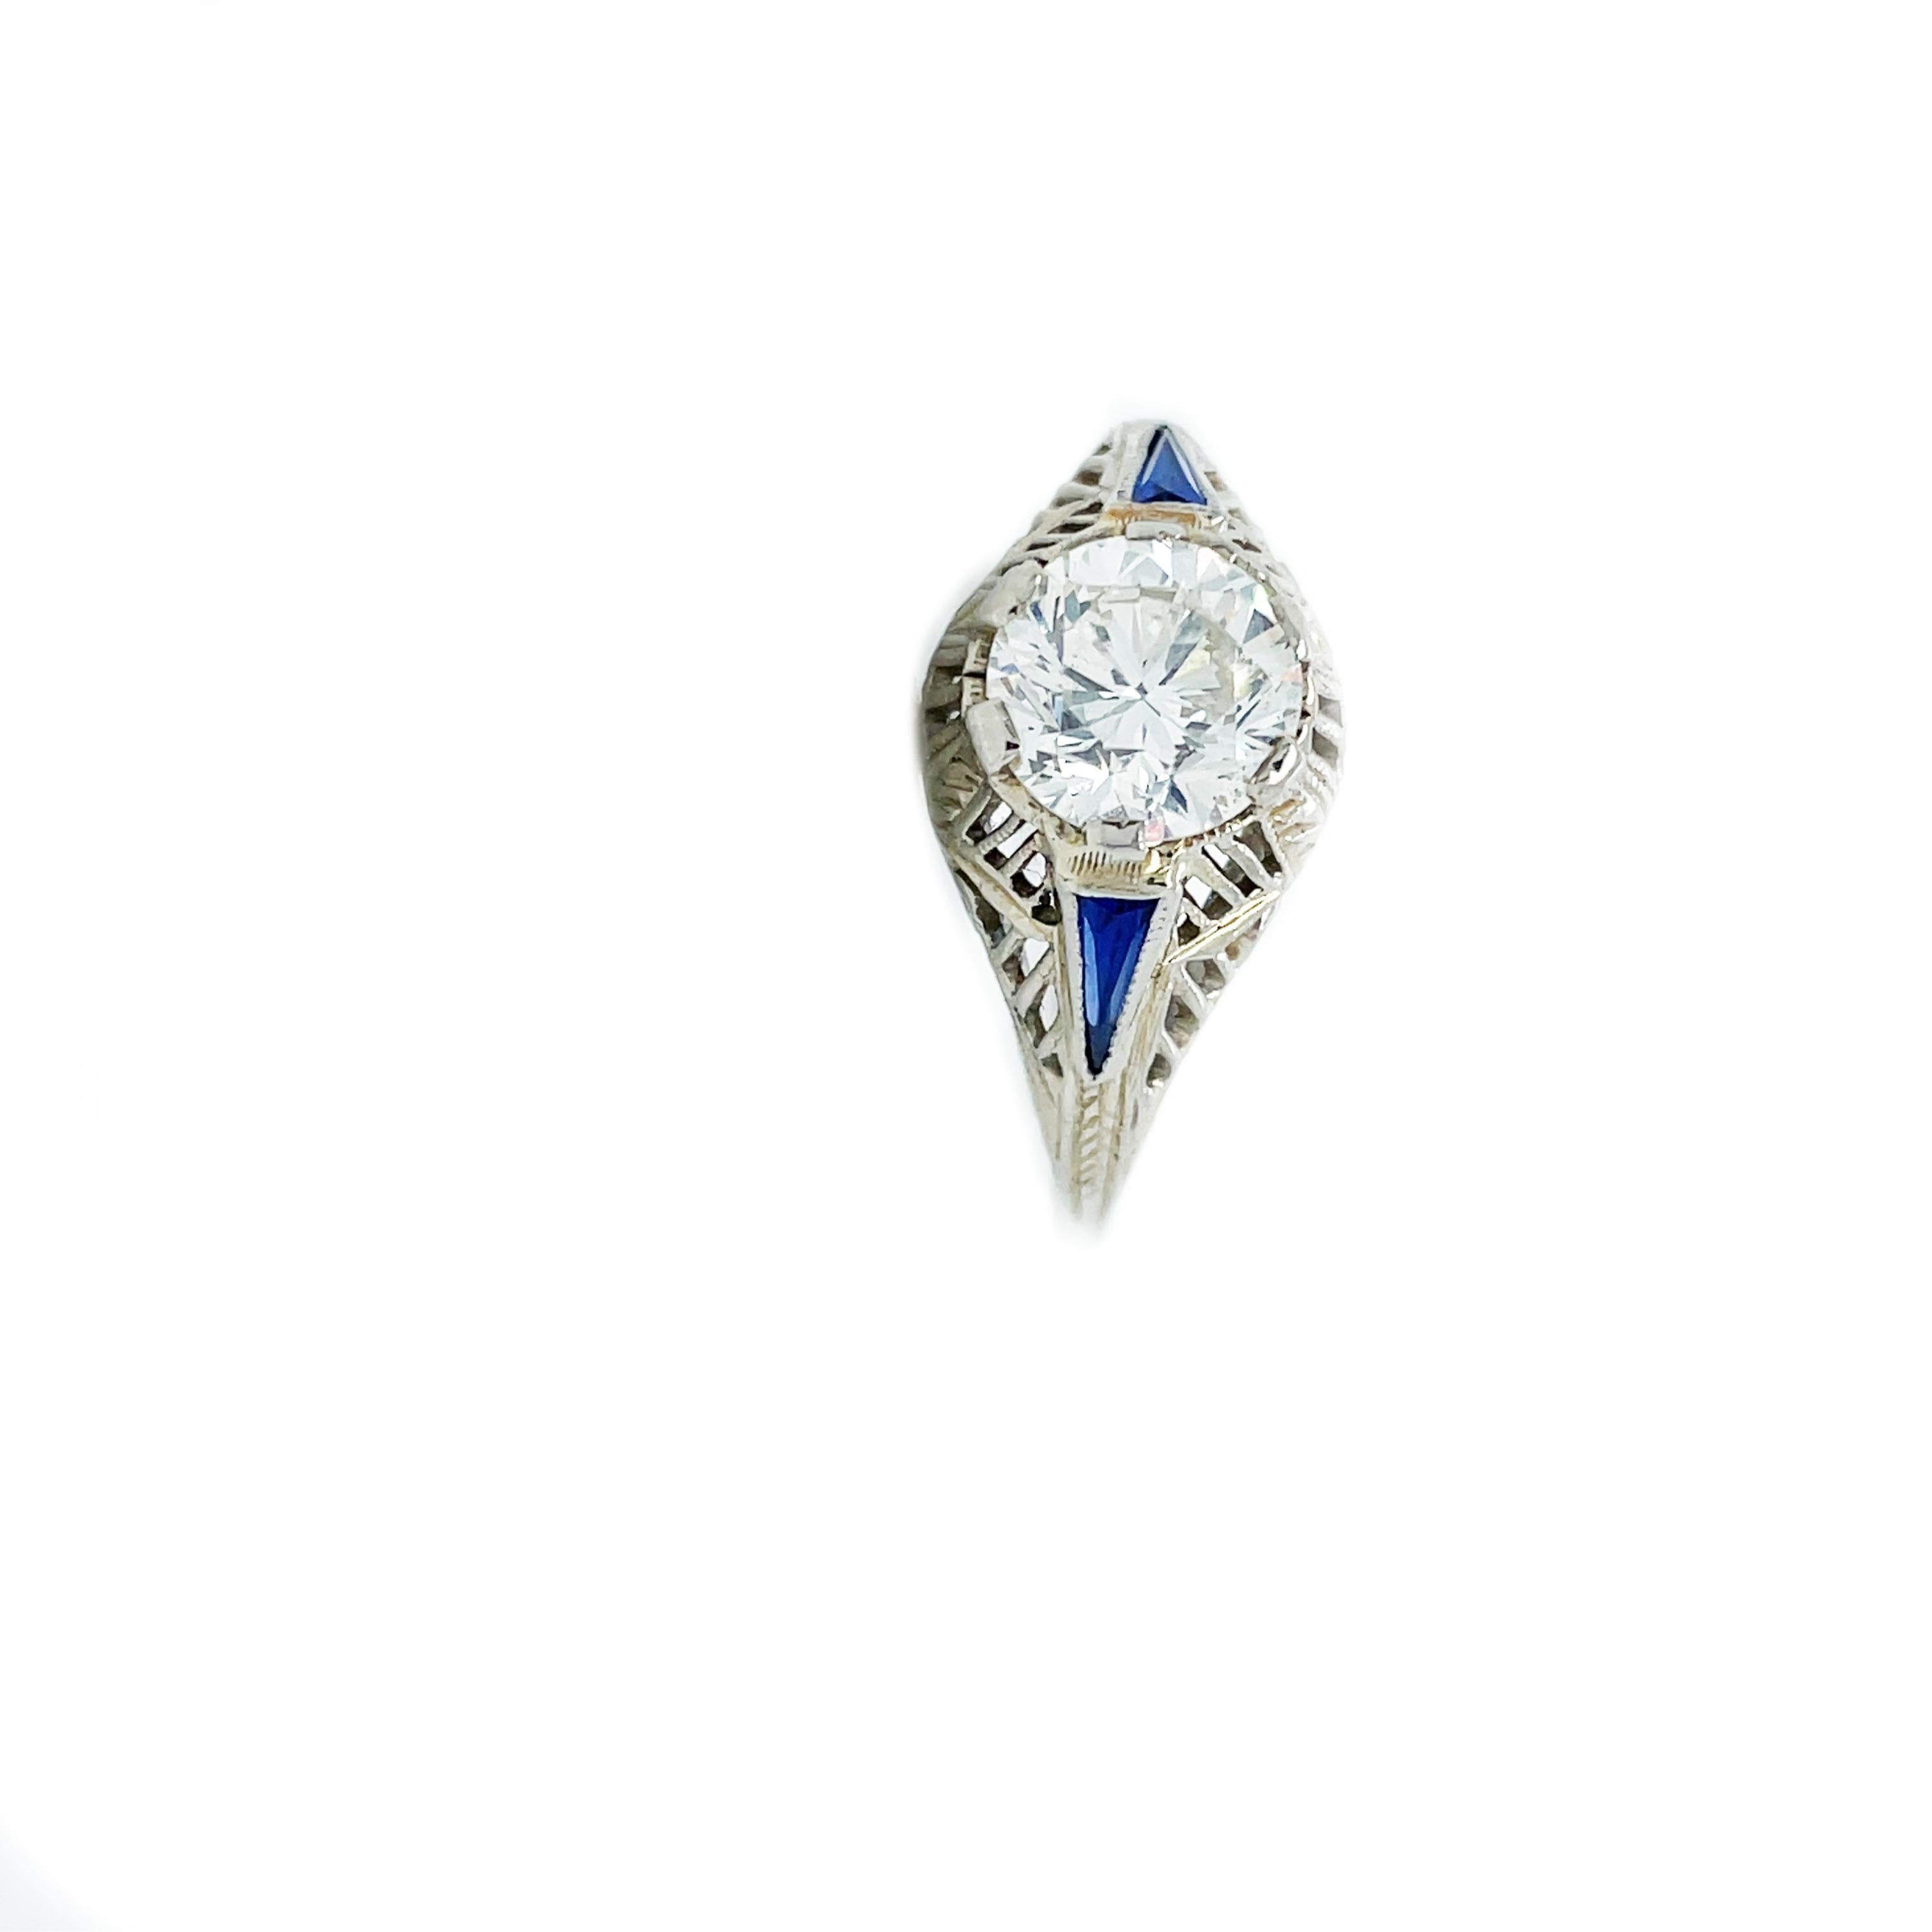 1925 Art Deco Diamond and Sapphire White Gold Ring with AGS Report In Good Condition For Sale In Lexington, KY